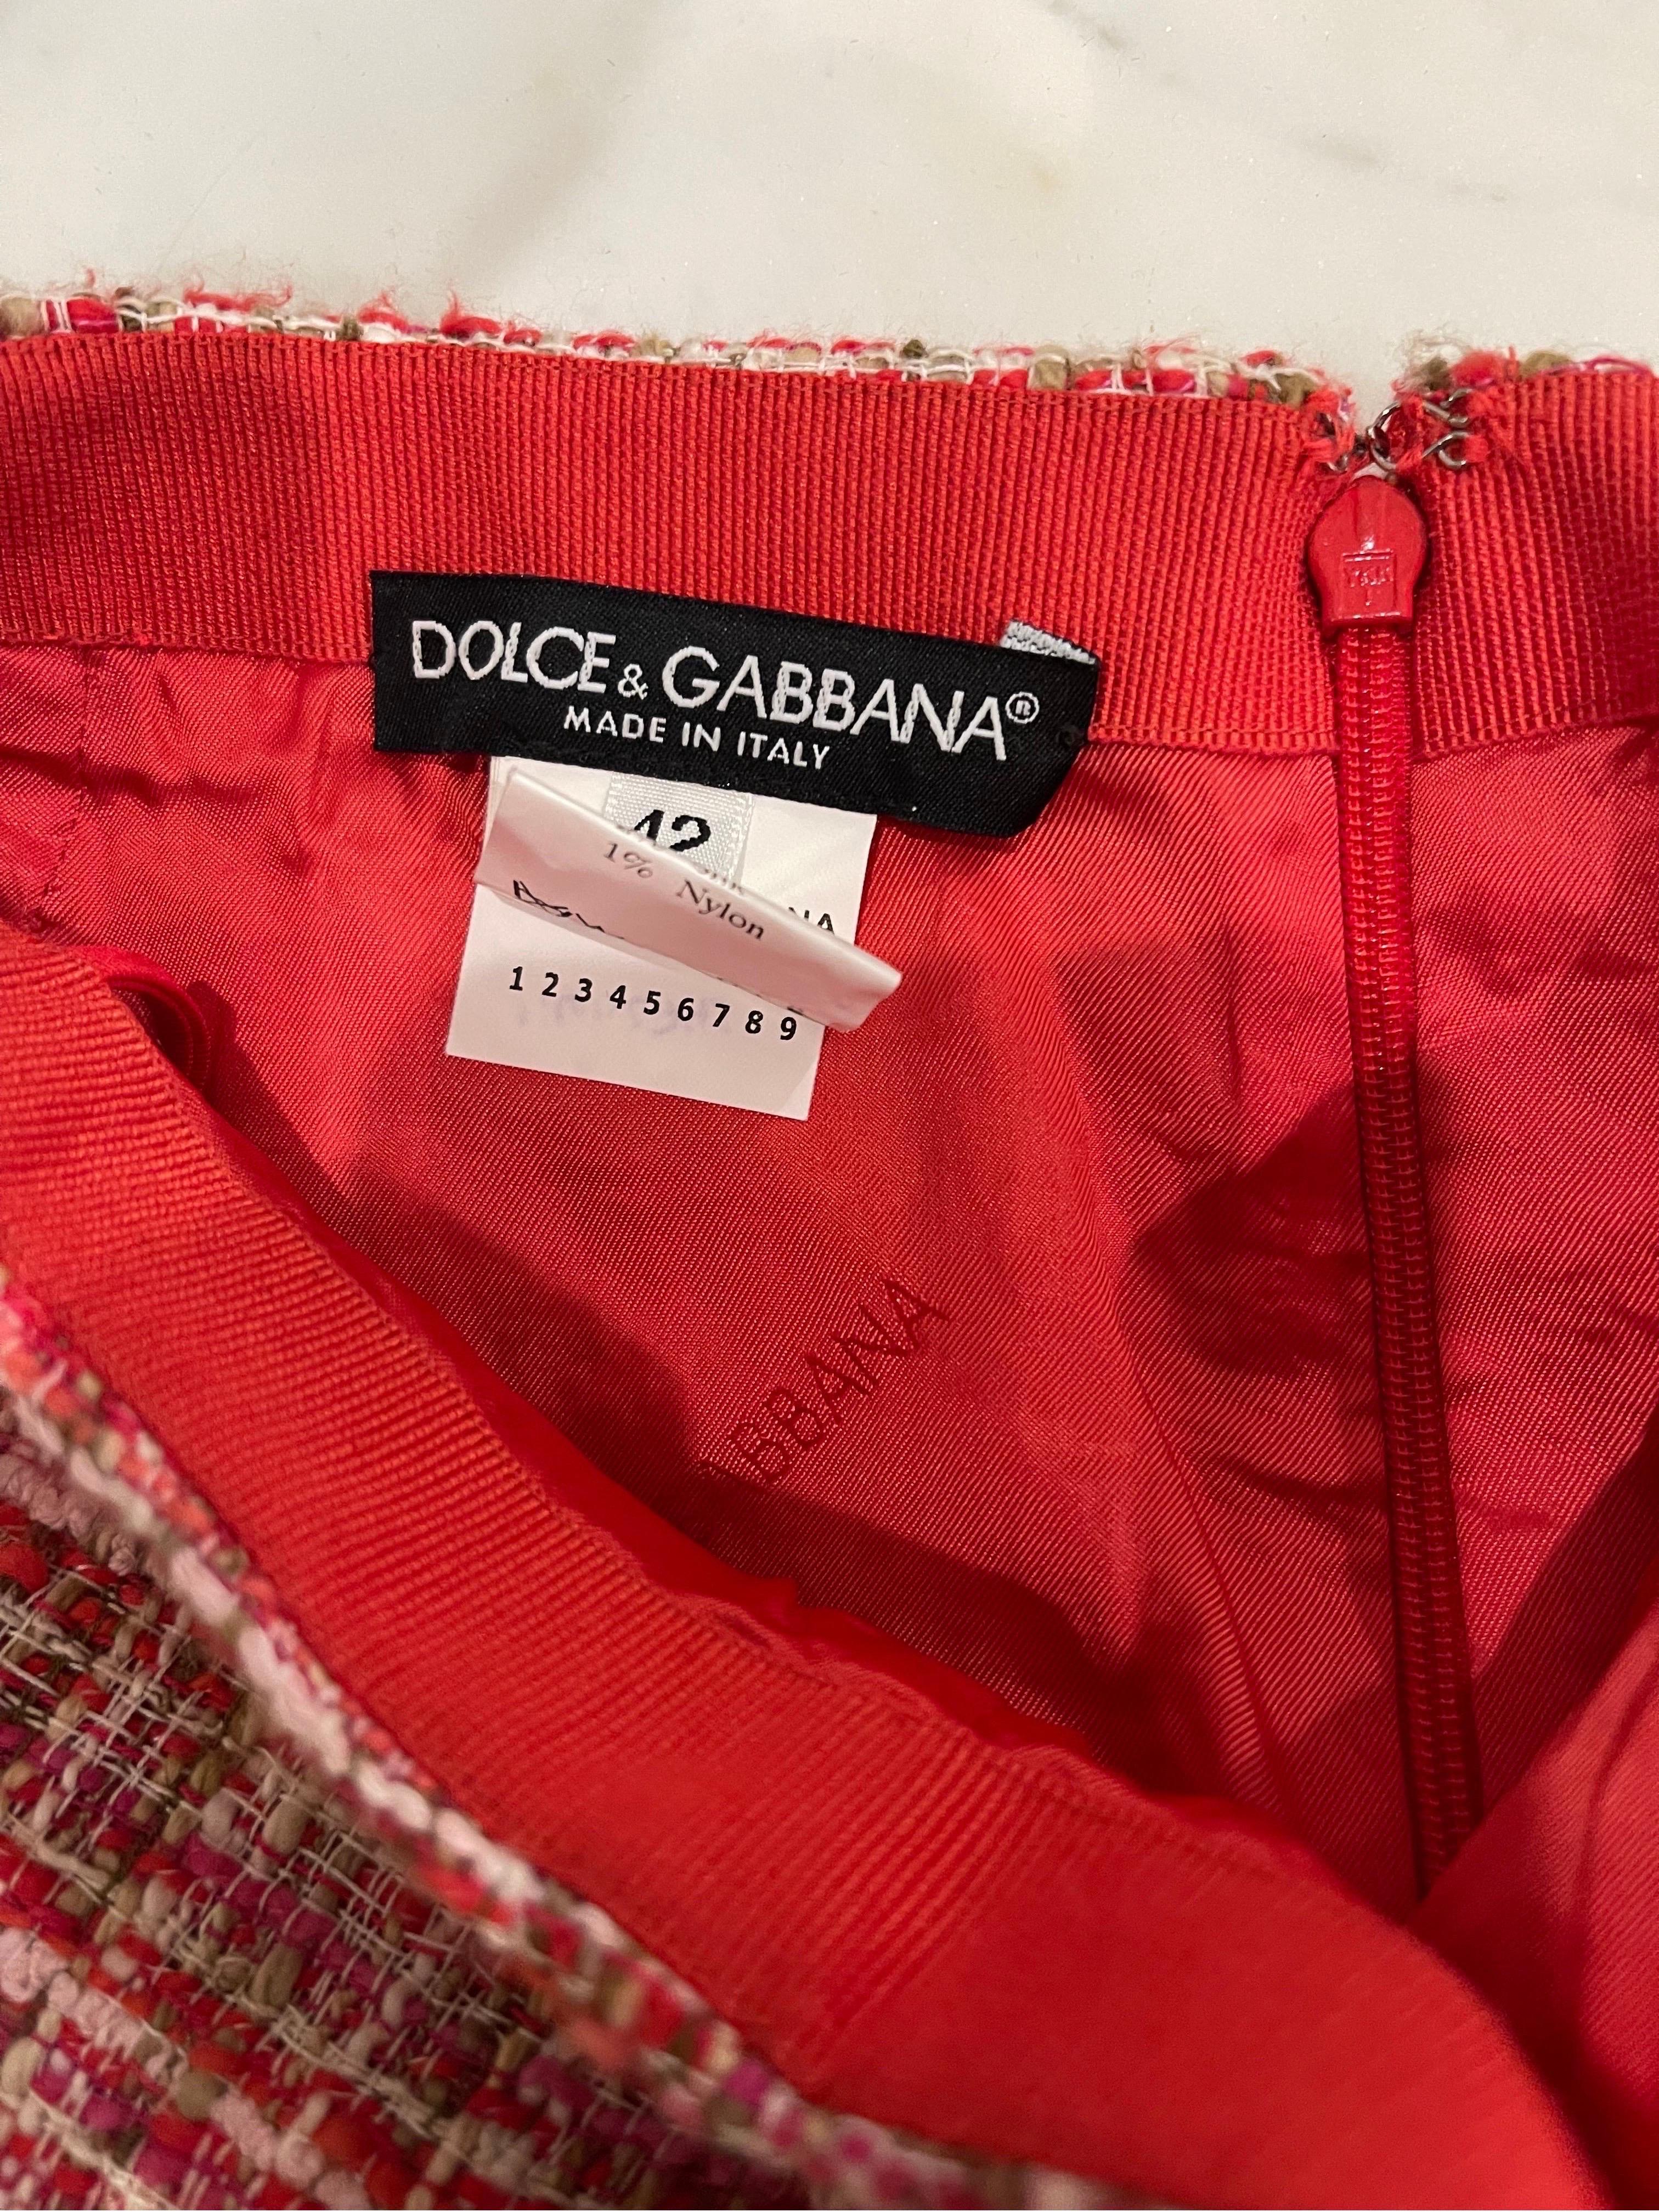 Amazing late 90s DOLCE & GABBANA colorful hot pink tweed mini skirt ! Features bright colors of pink, red, tan and ivory throughout. Big neon green / yellow beads across the hips. Hidden zipper up the back with hook-and-eye closure. Pair with a tank